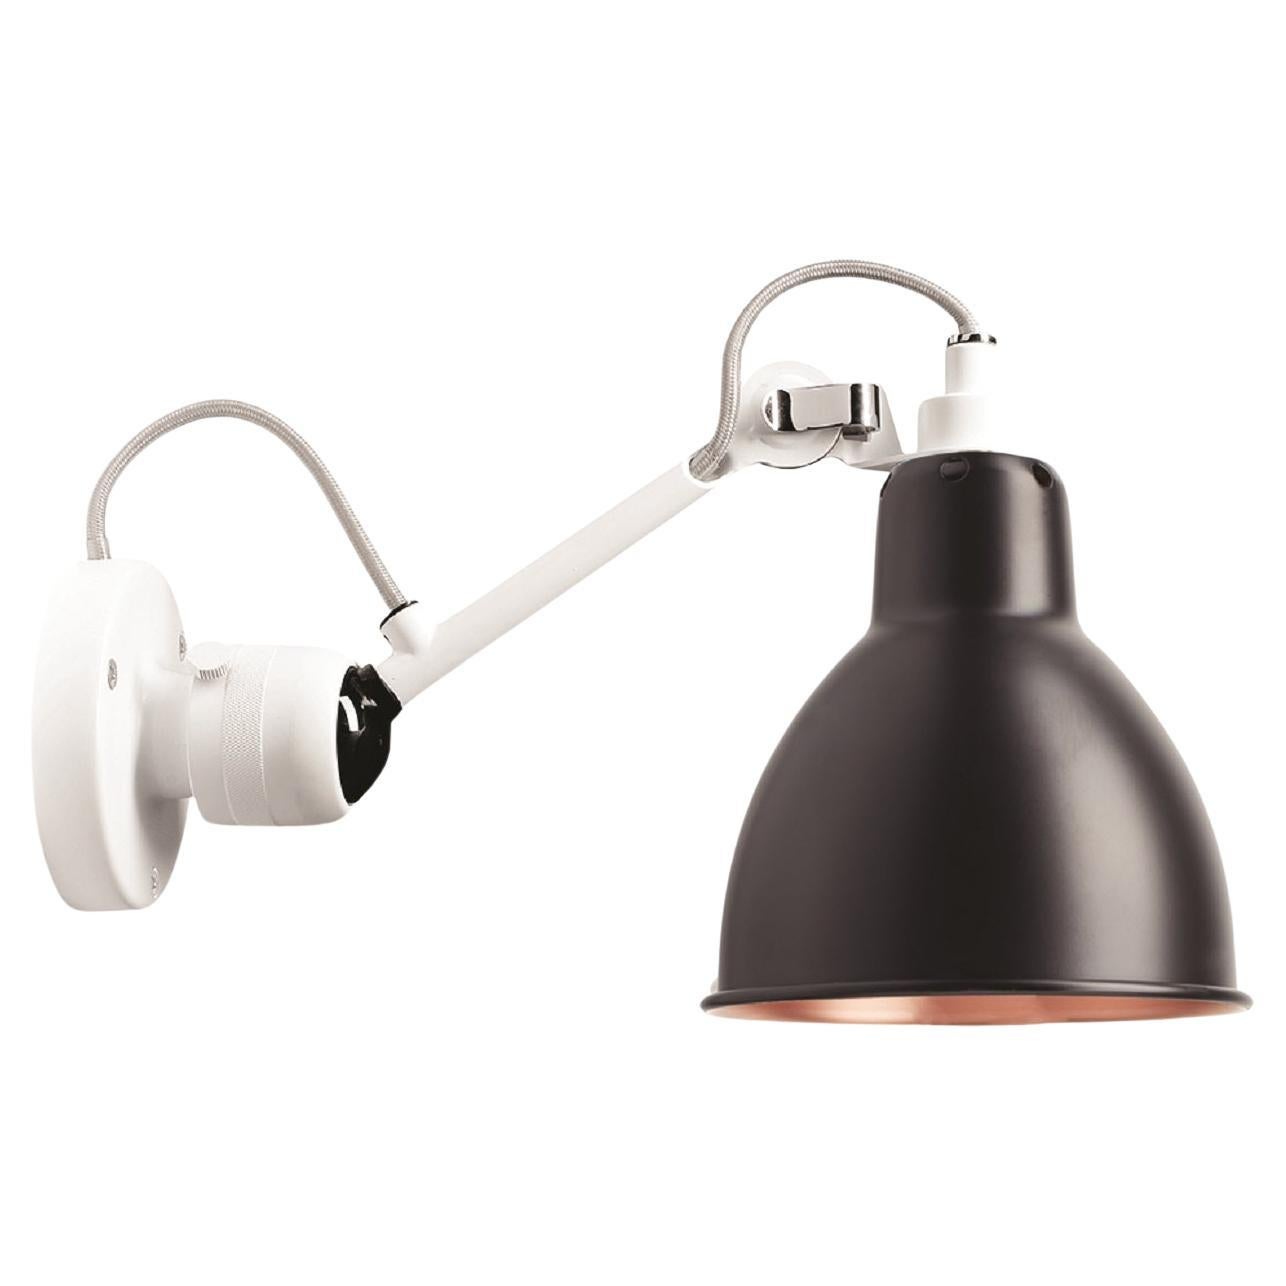 DCW Editions La Lampe Gras N°304 Wall Lamp in White Arm and Black Copper Shade